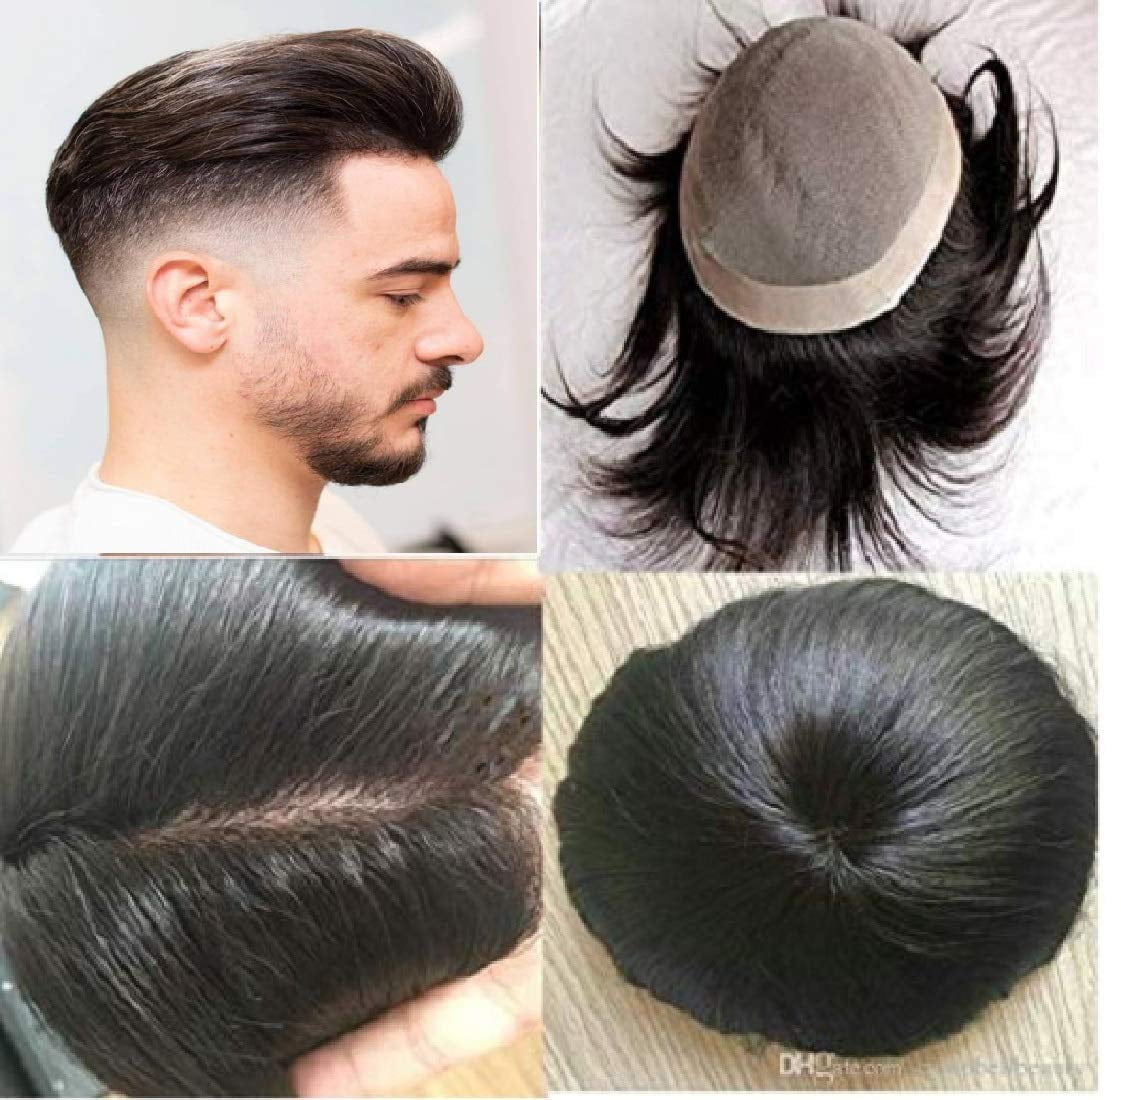 BEST QUALITY HAIR PATCH